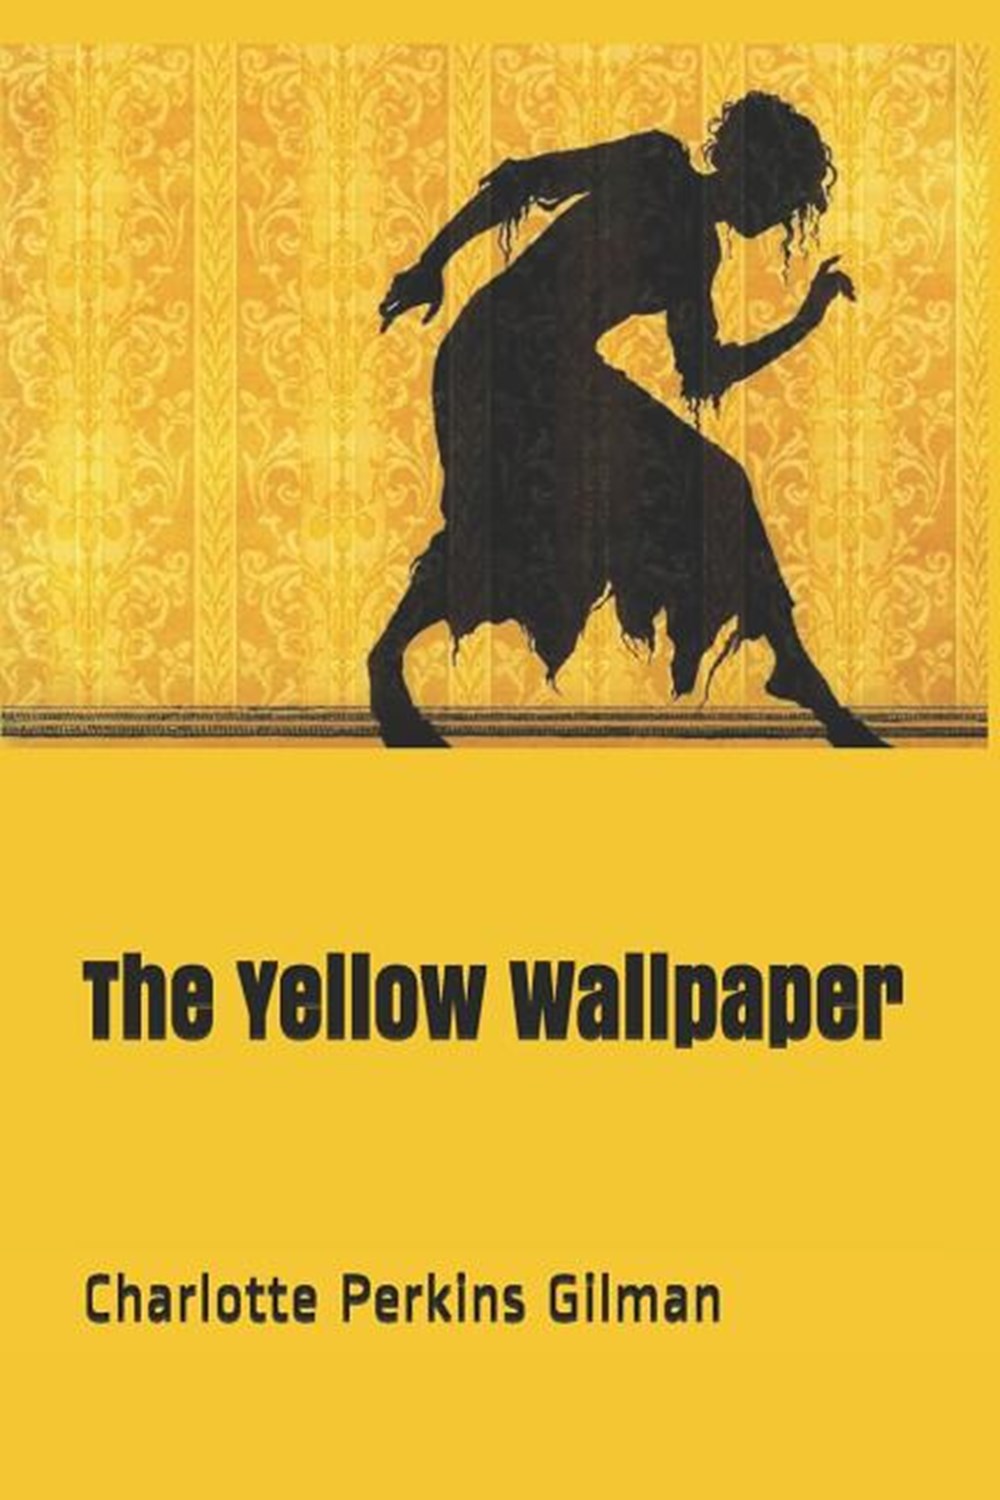 The Yellow Wallpaper in Paperback by Charlotte Perkins Gilman